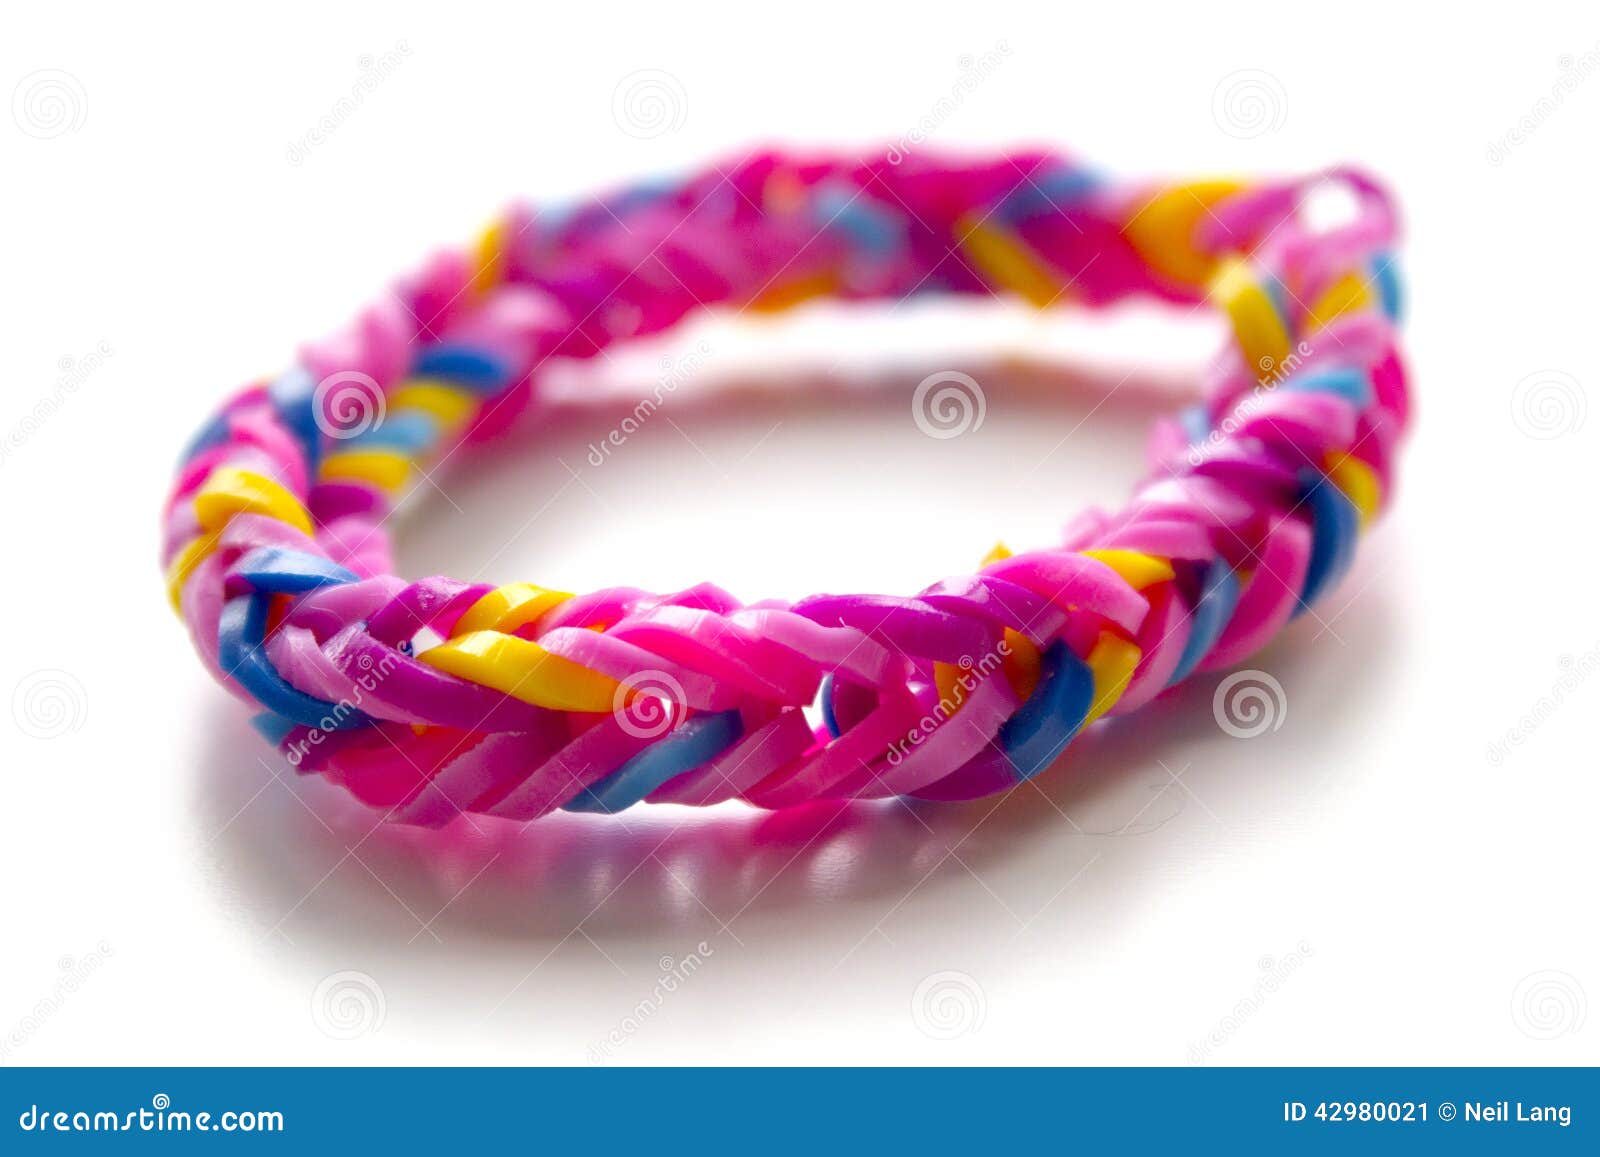 Rubber Band Bracelets: 35 colorful projects you'll love to make : Hopping,  Lucy: Amazon.in: Books